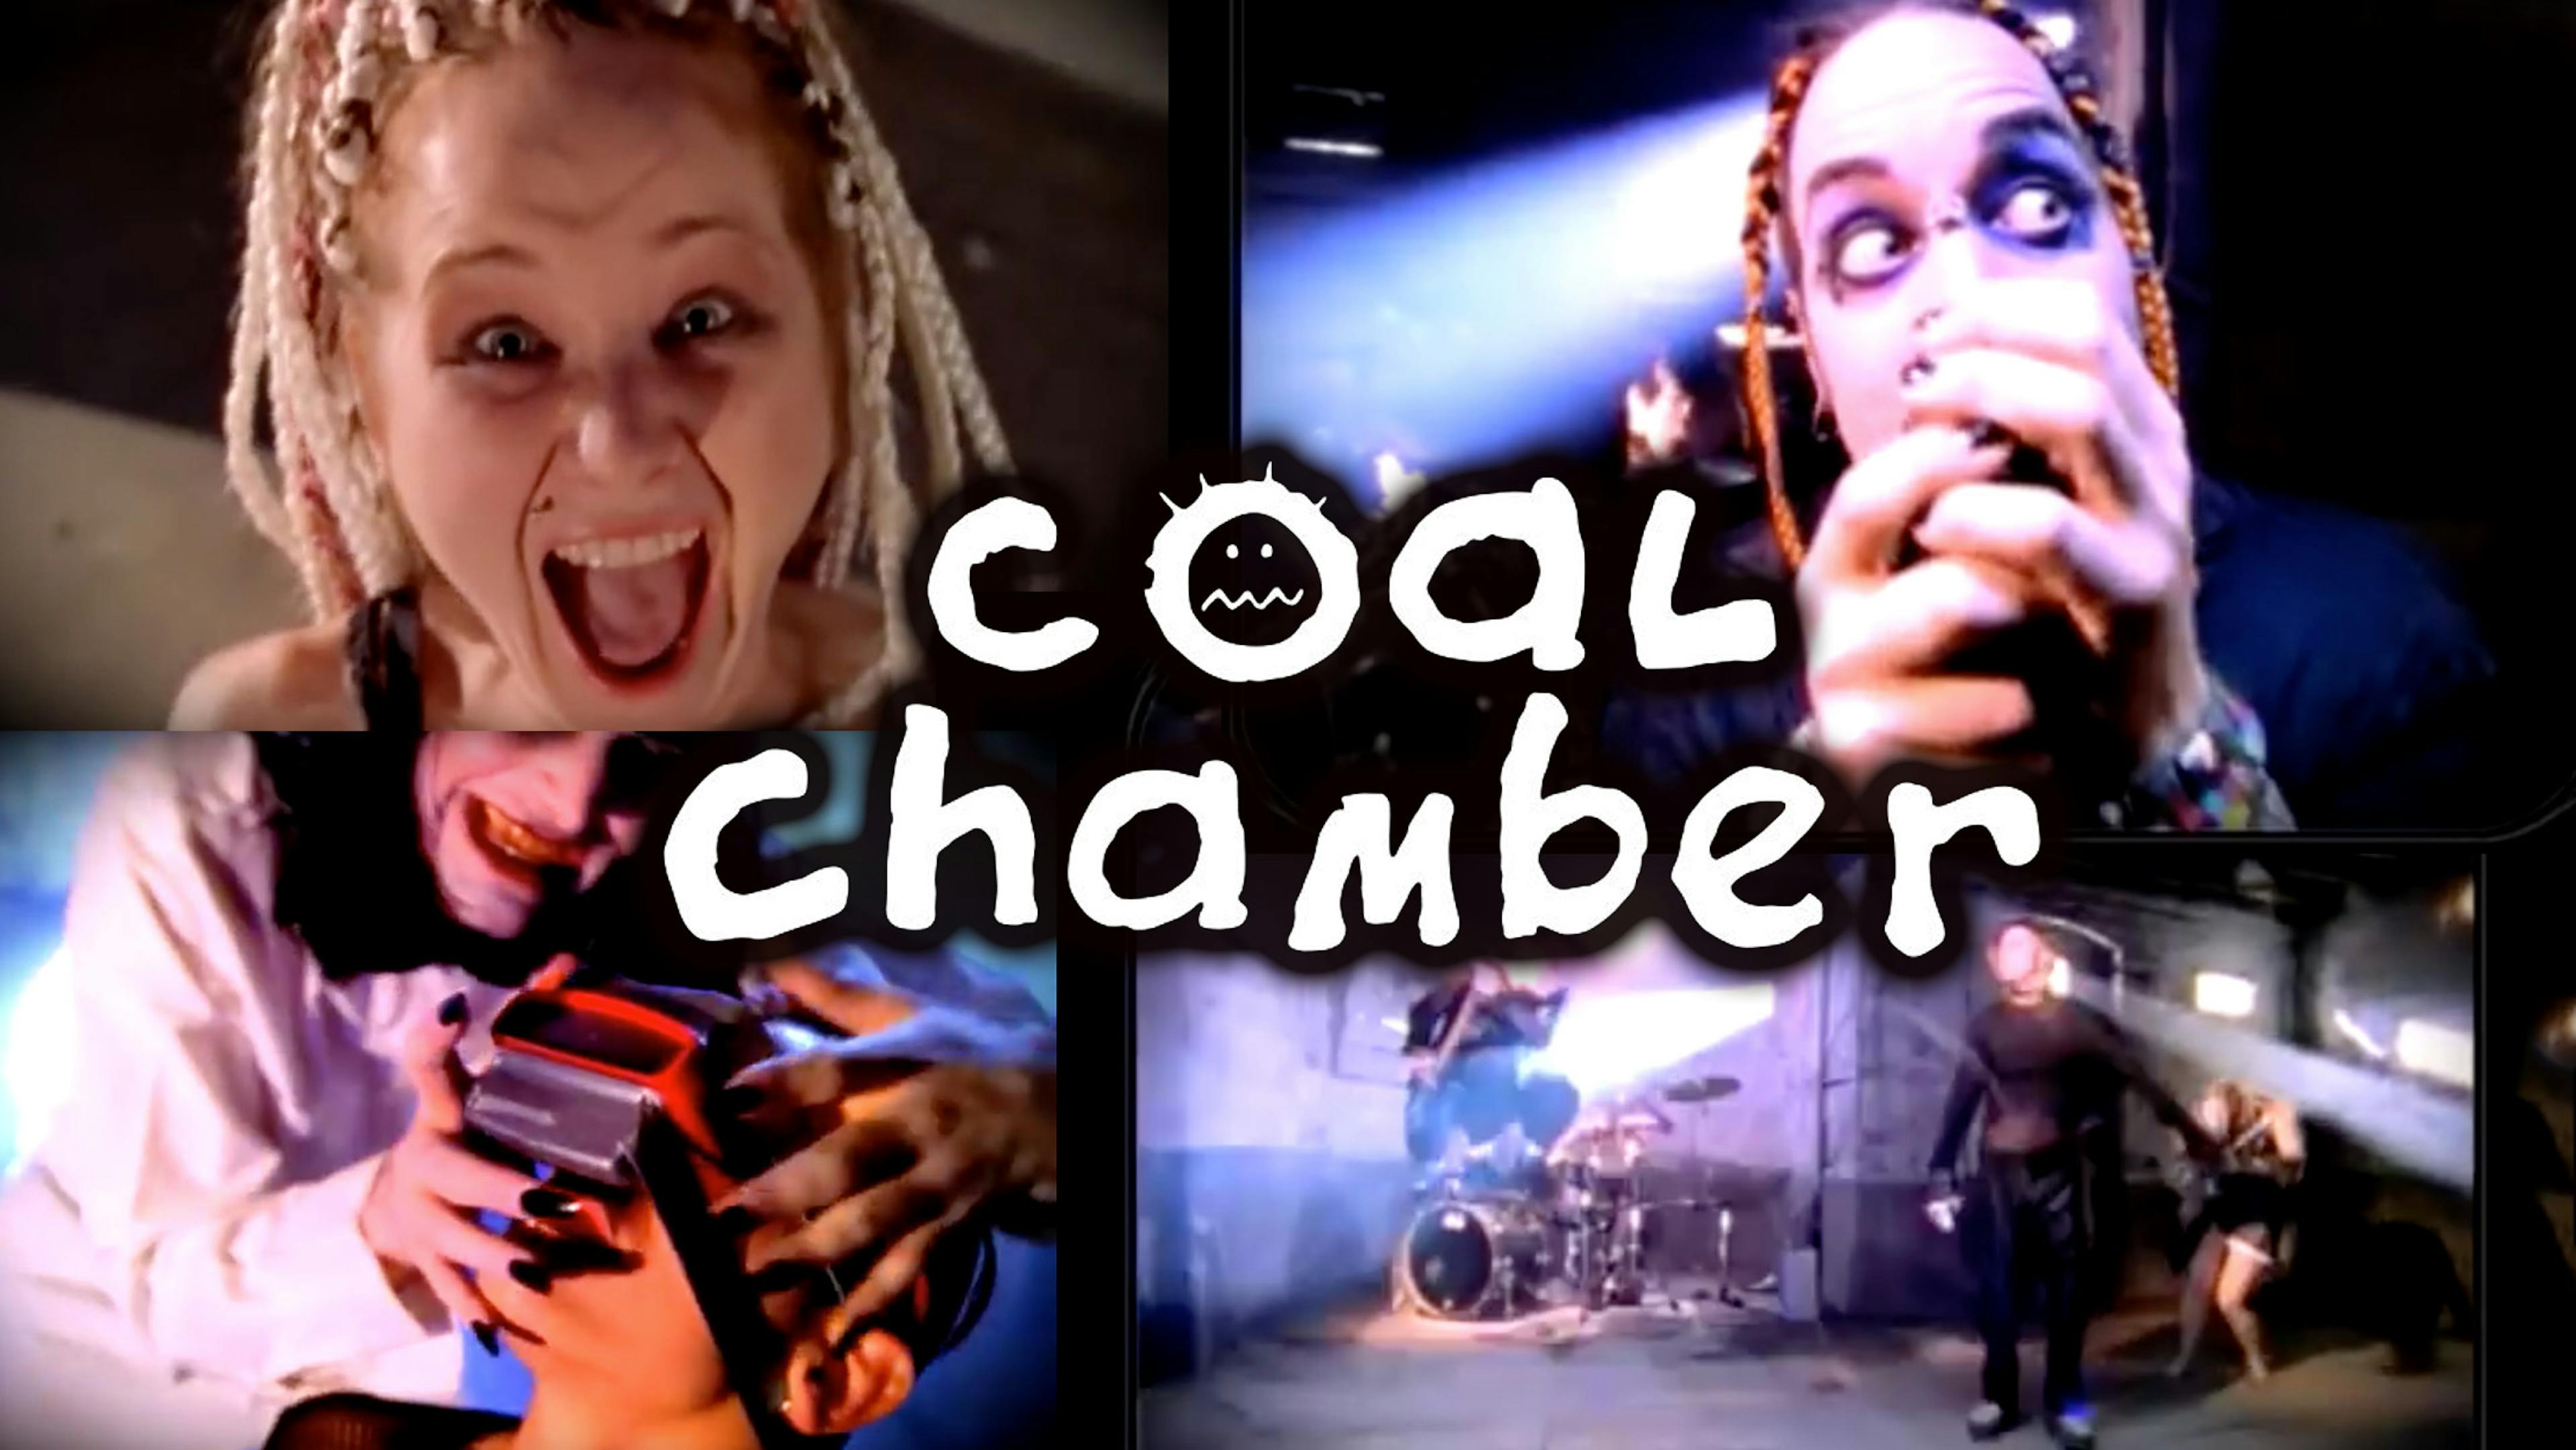 A Deep Dive Into Coal Chamber's Video For Loco